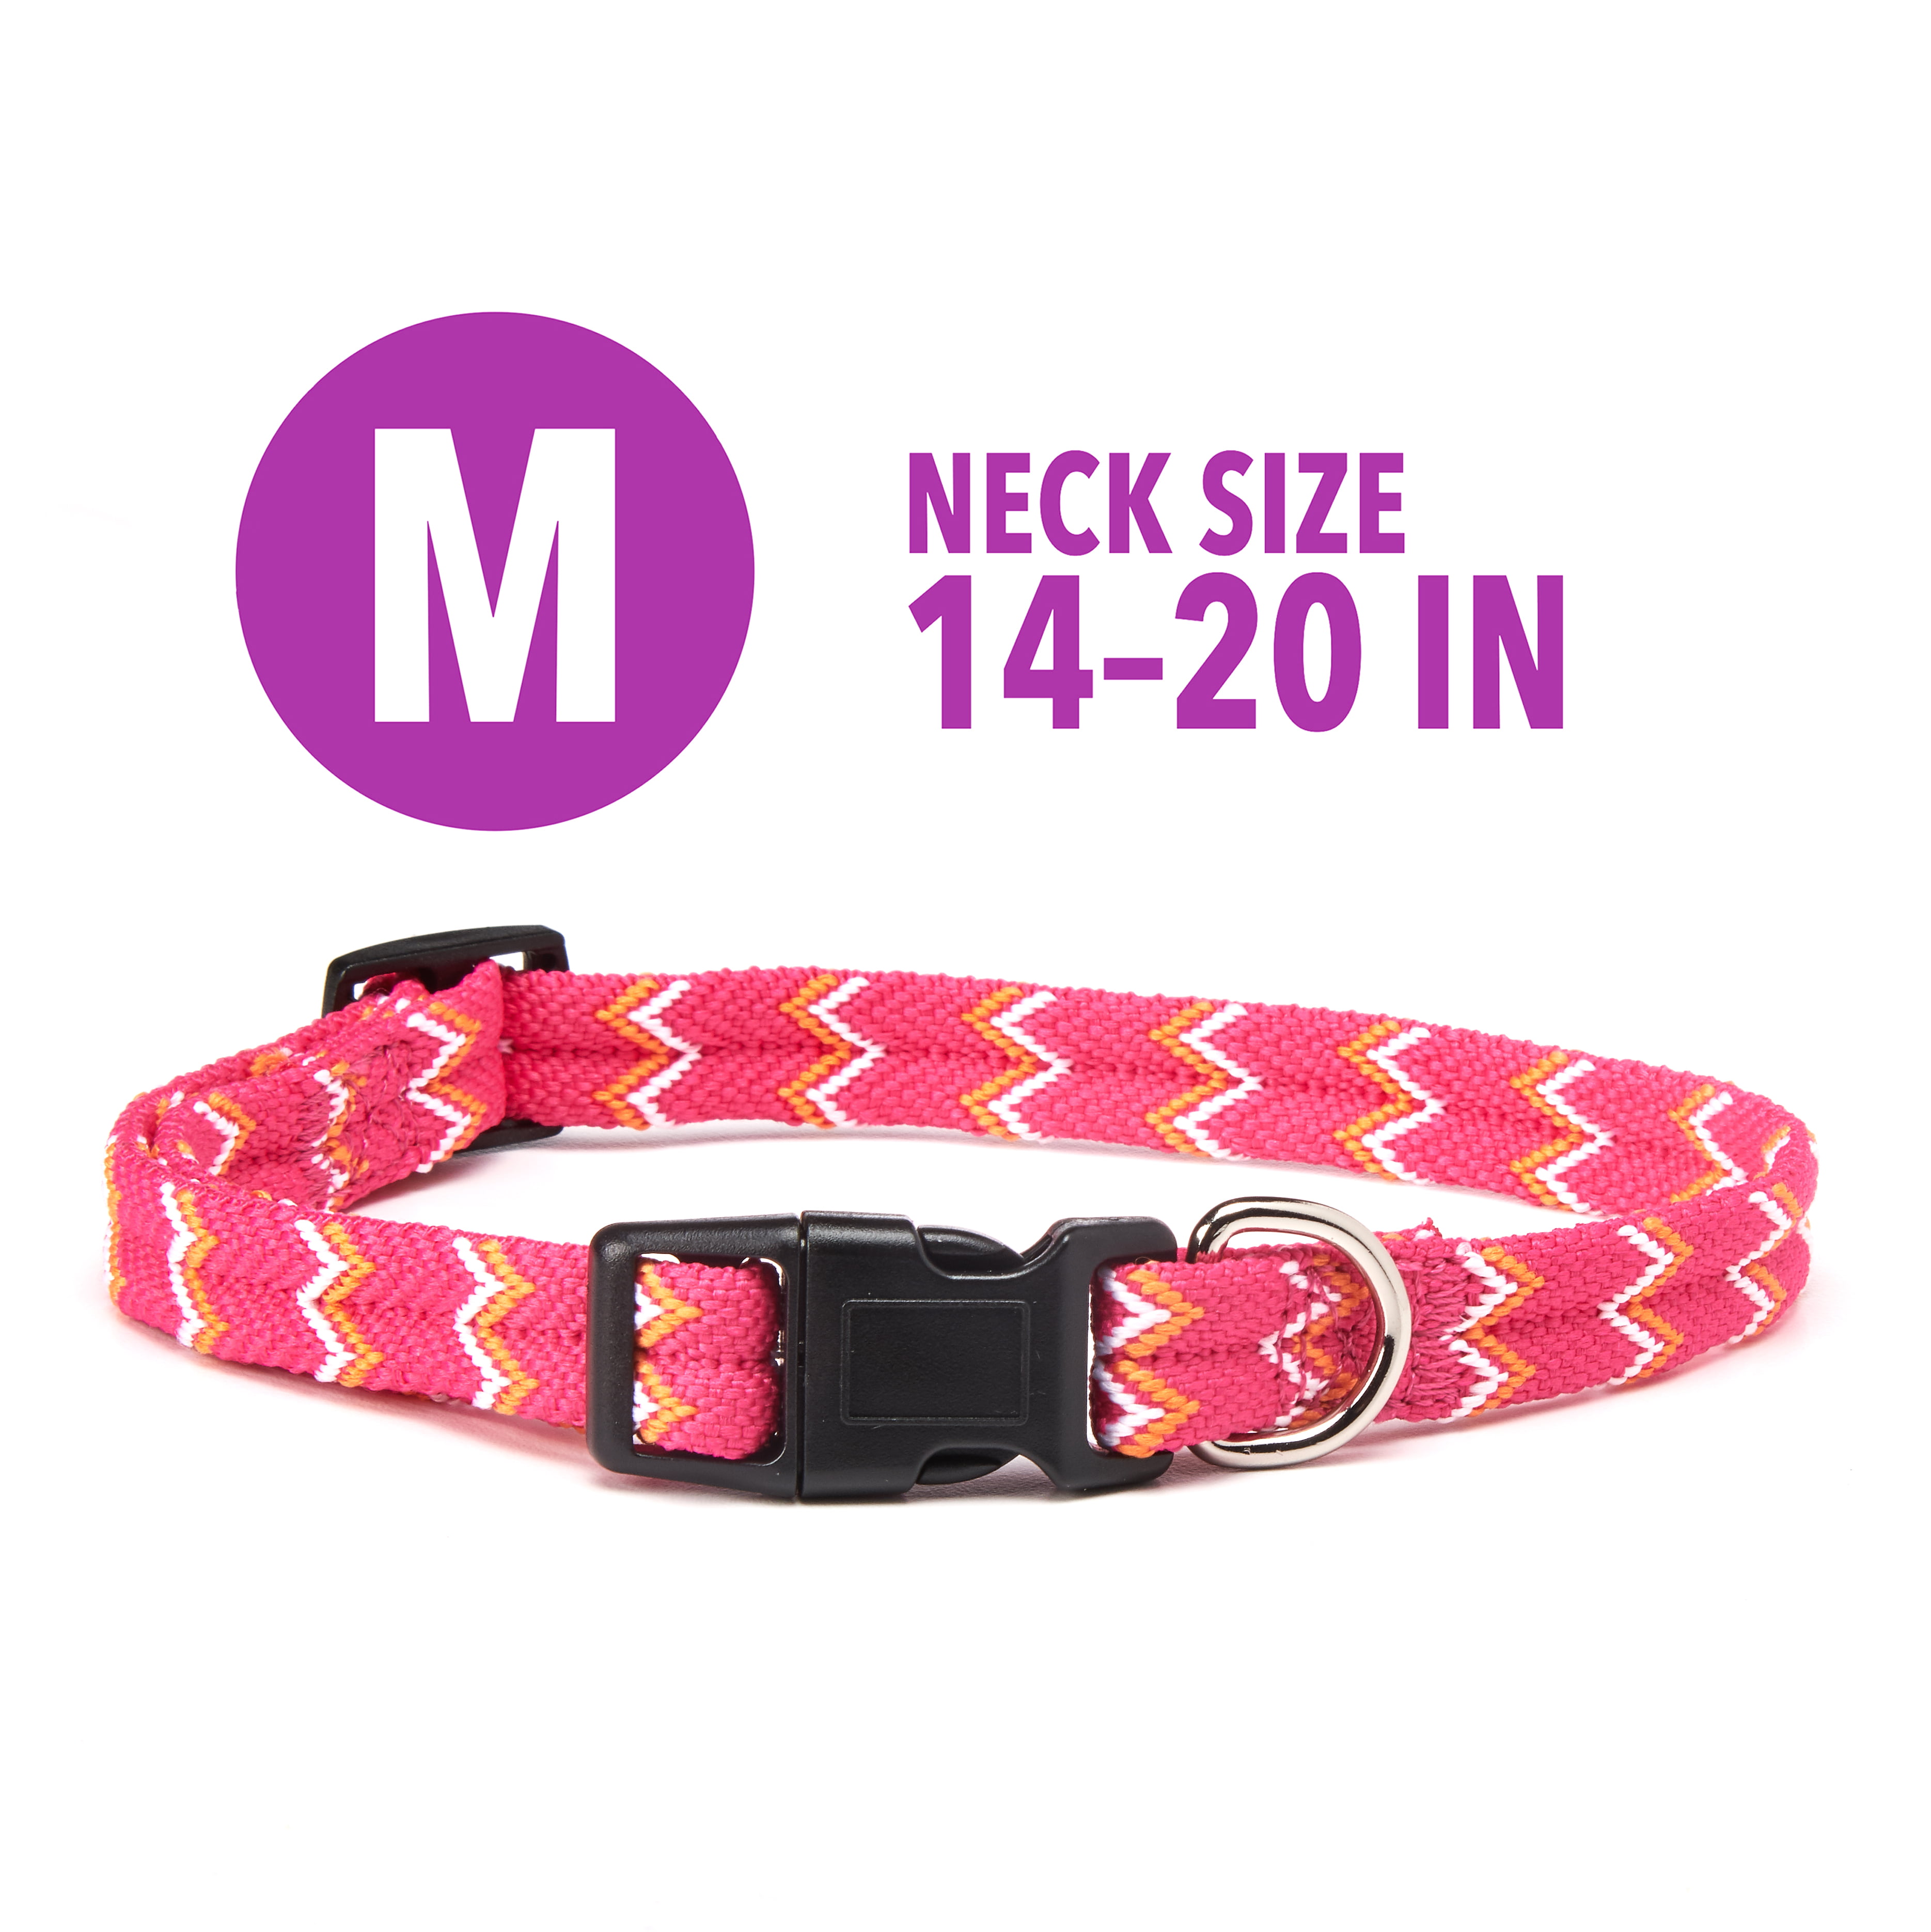 fashion dog collars and leashes